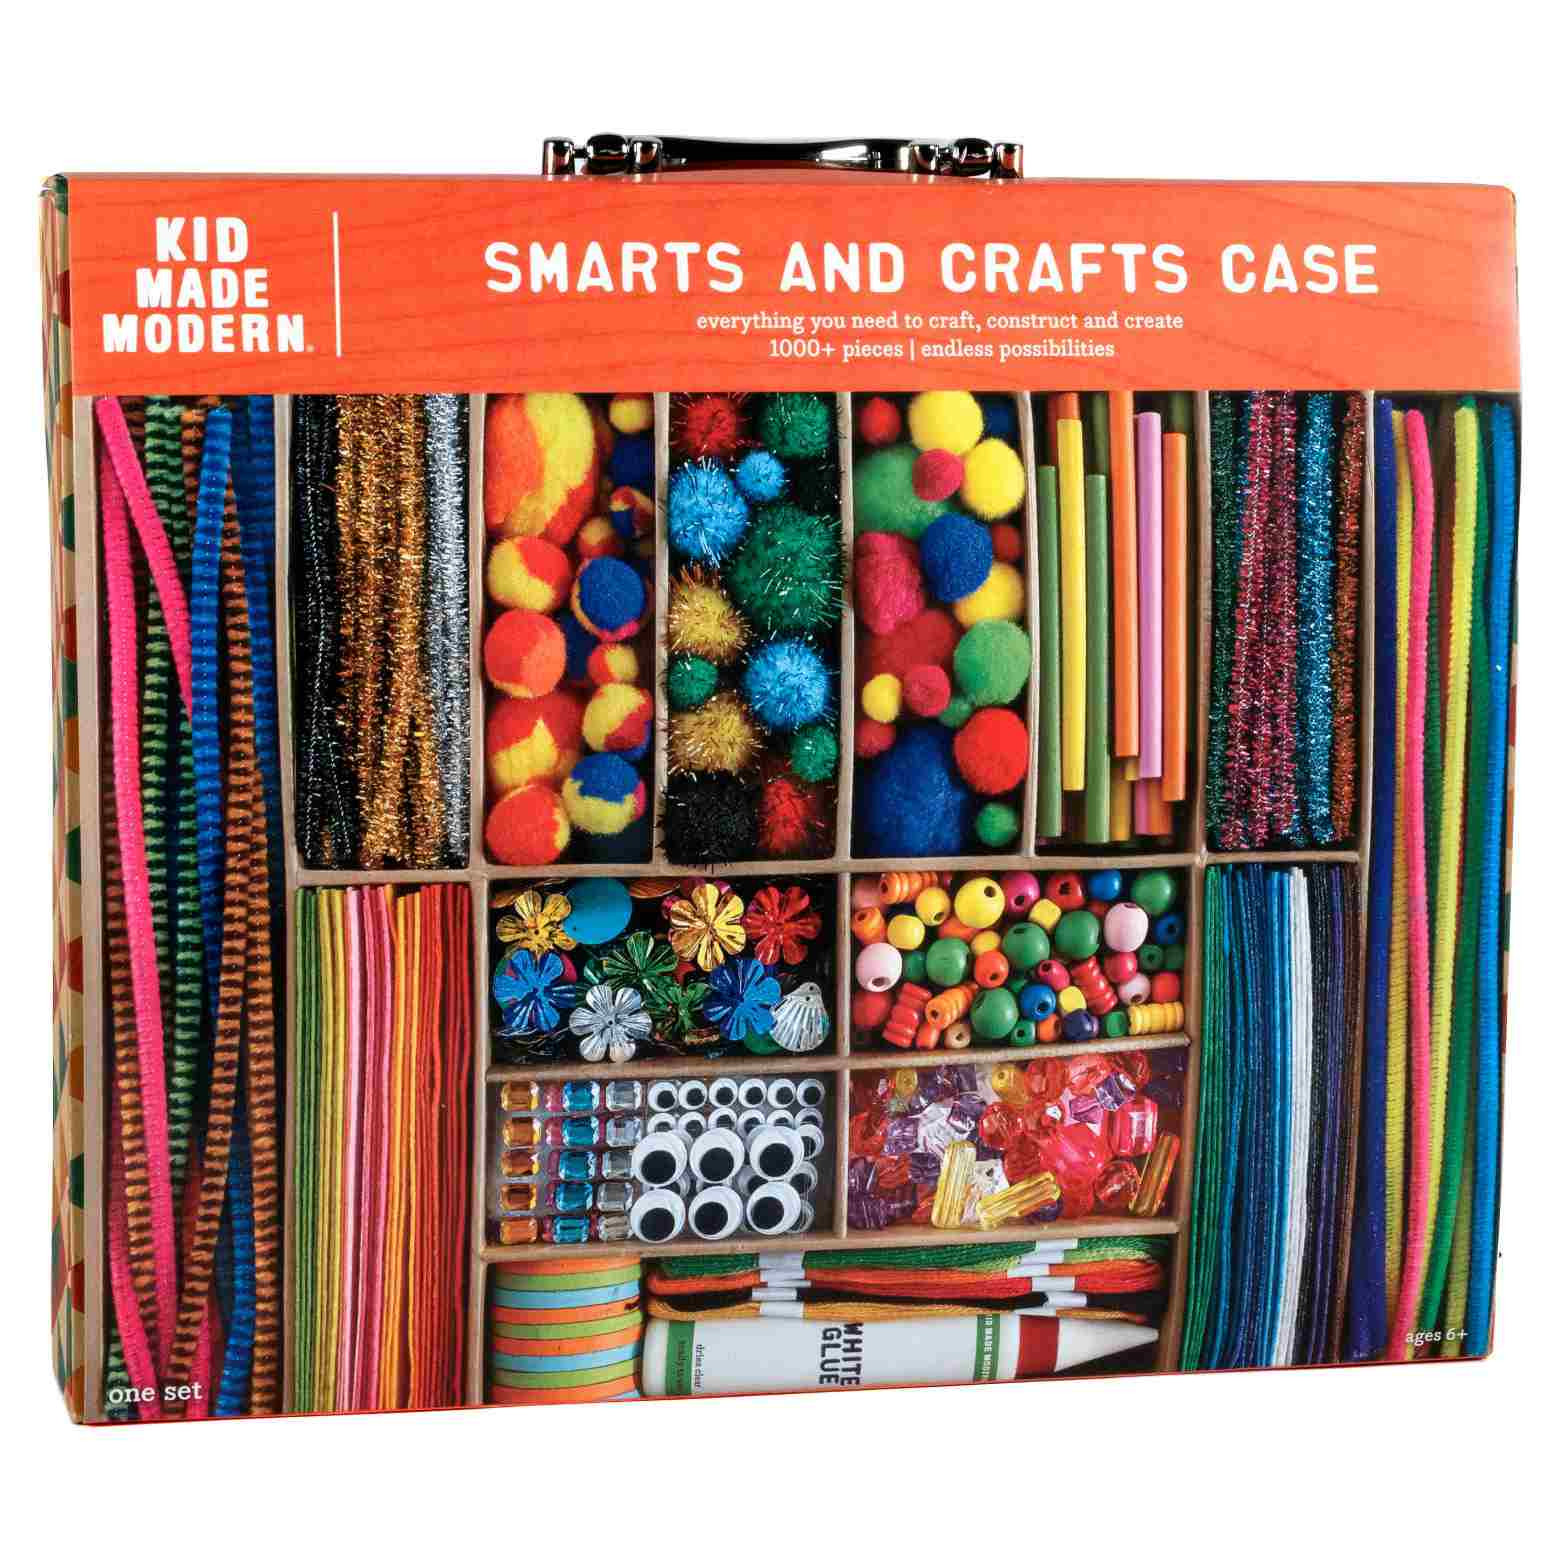 Craft Kits For Kids
 The 9 Best Craft Kits for Kids in 2020